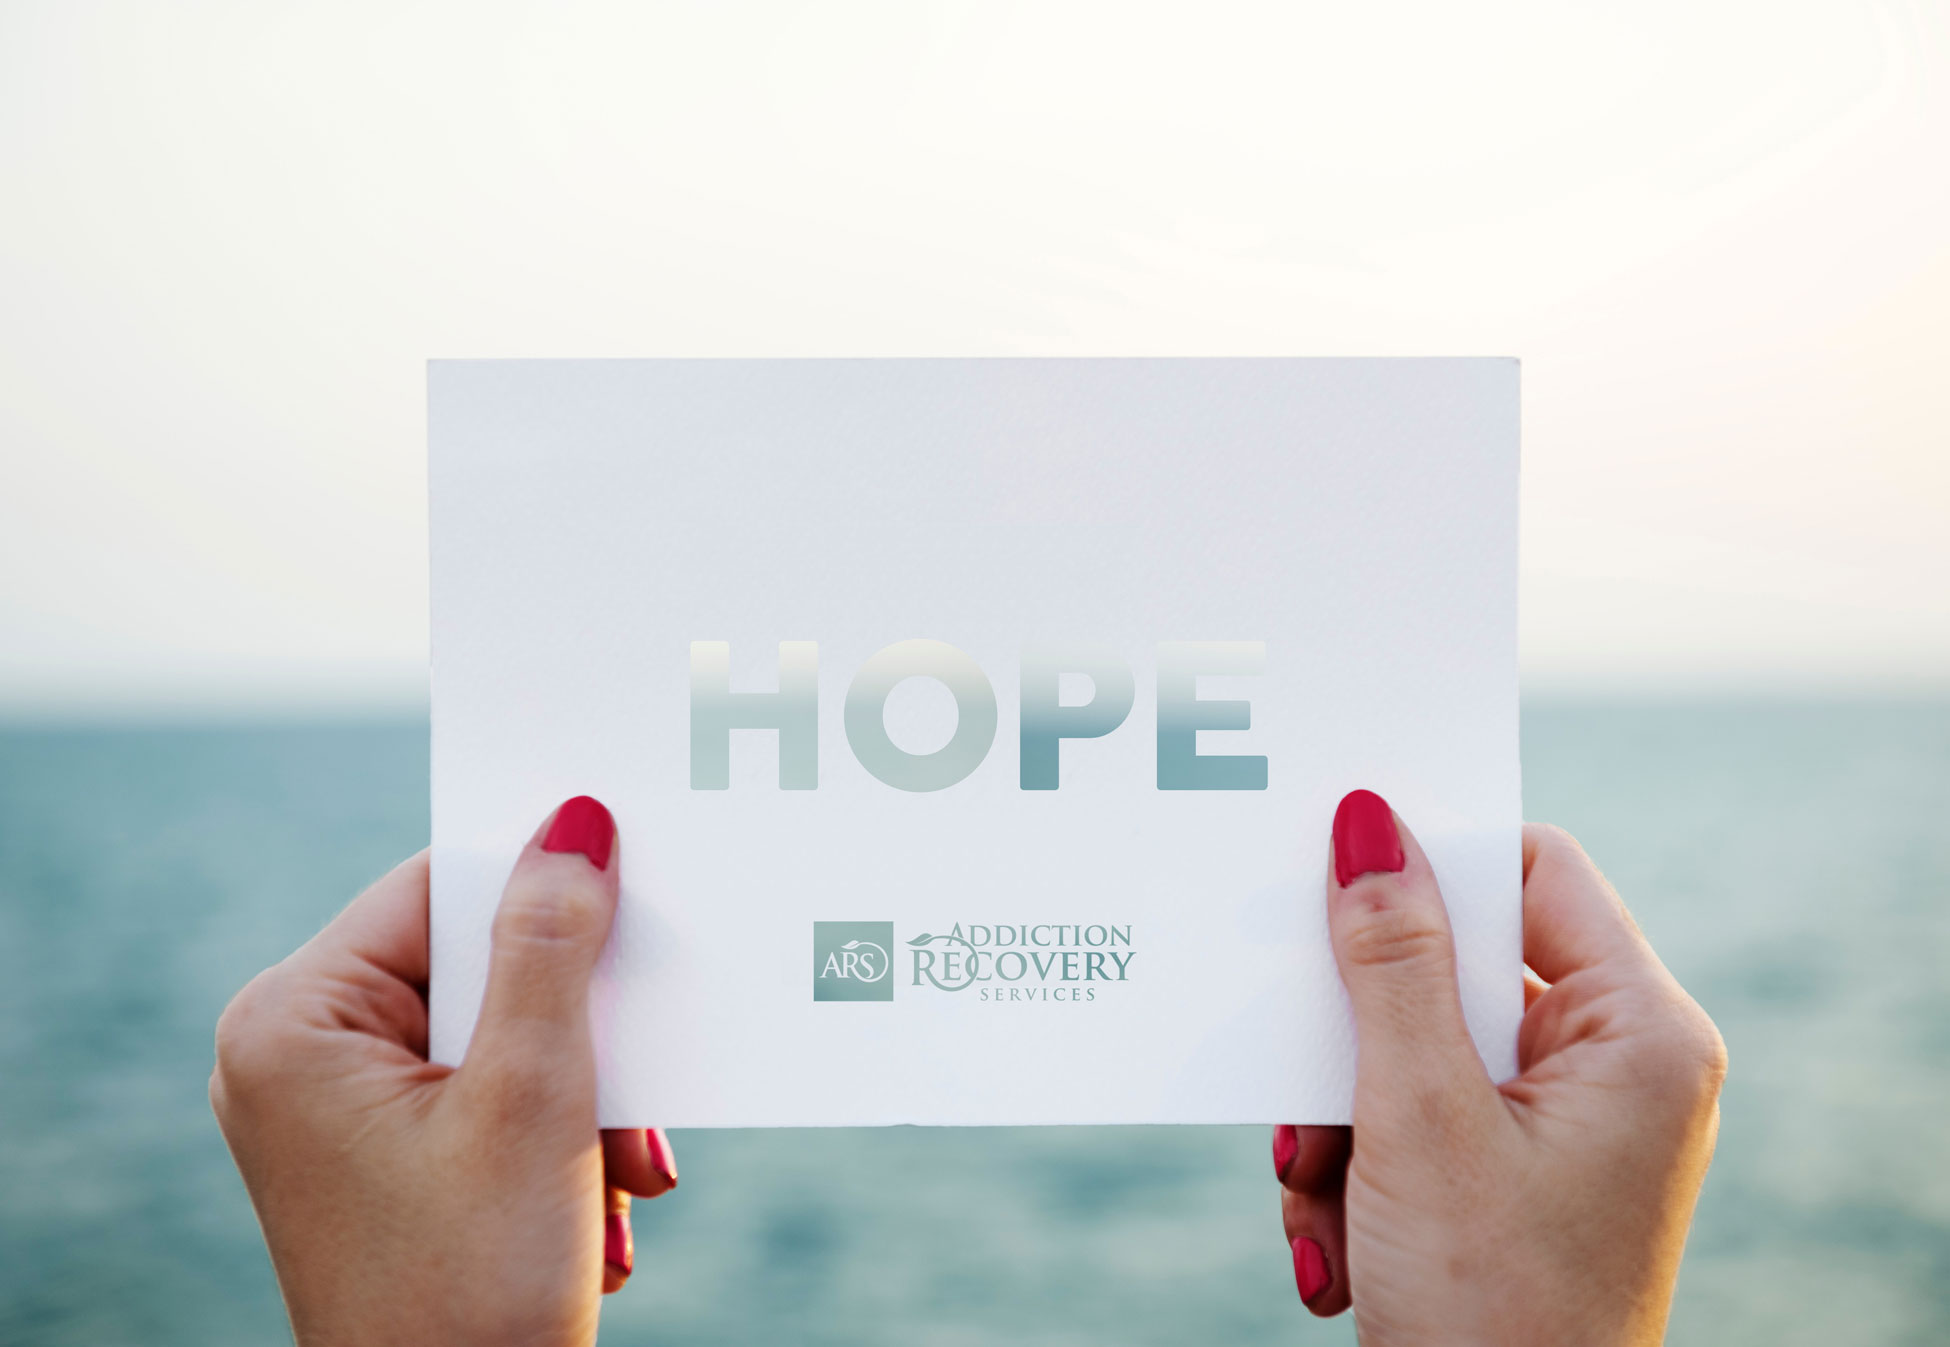 Addiction Recovery Services HOPE logo